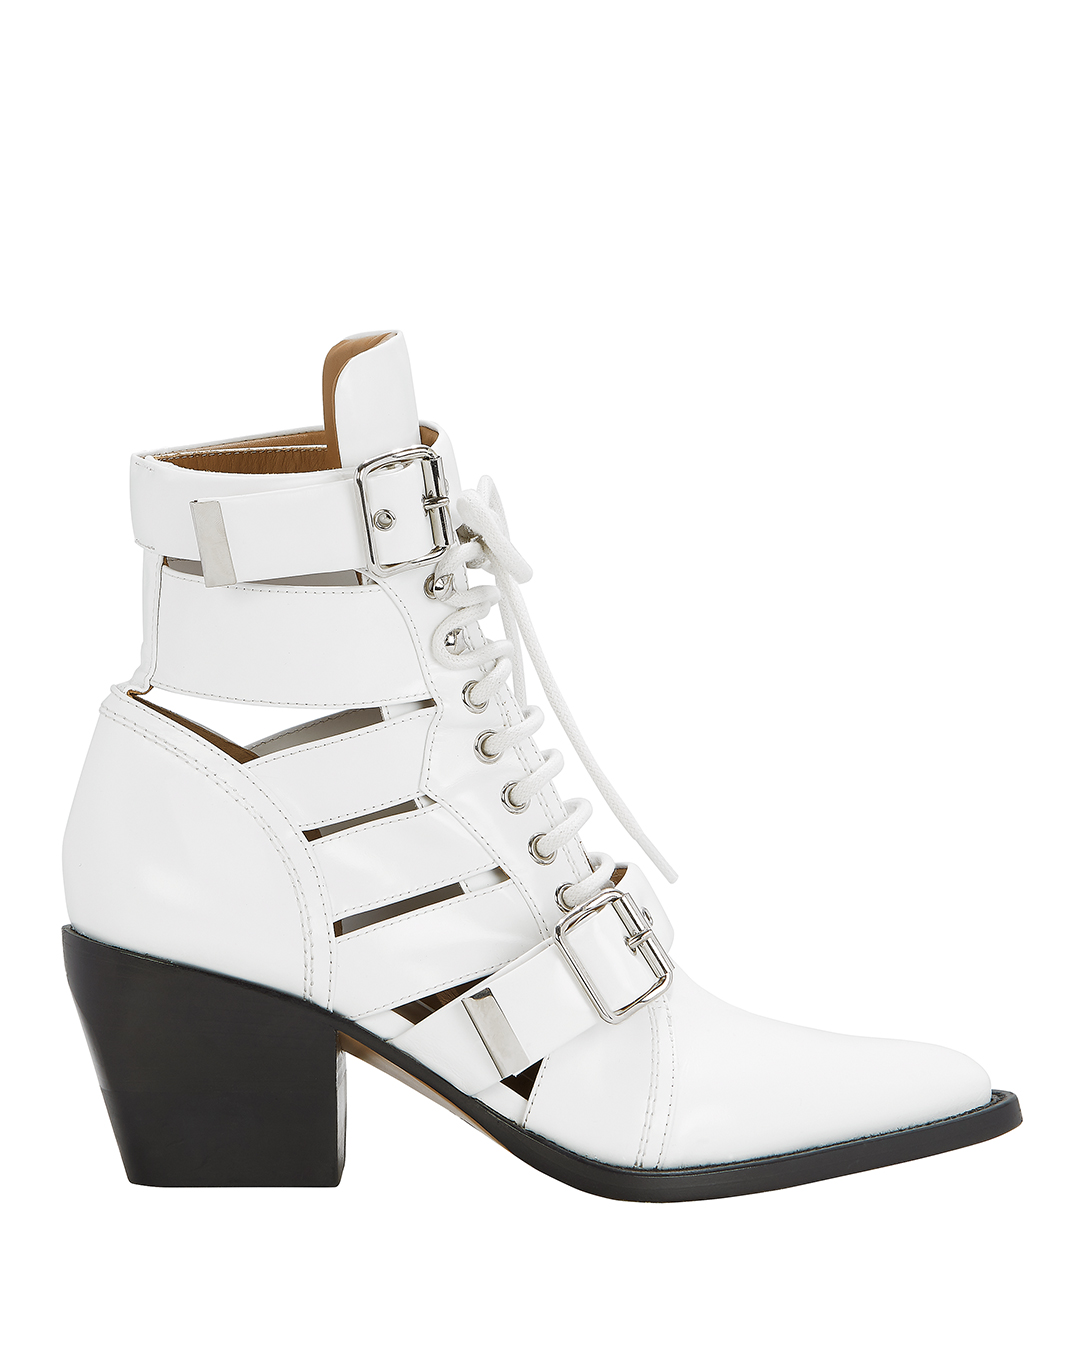 Rylee Cutout White Ankle Boots